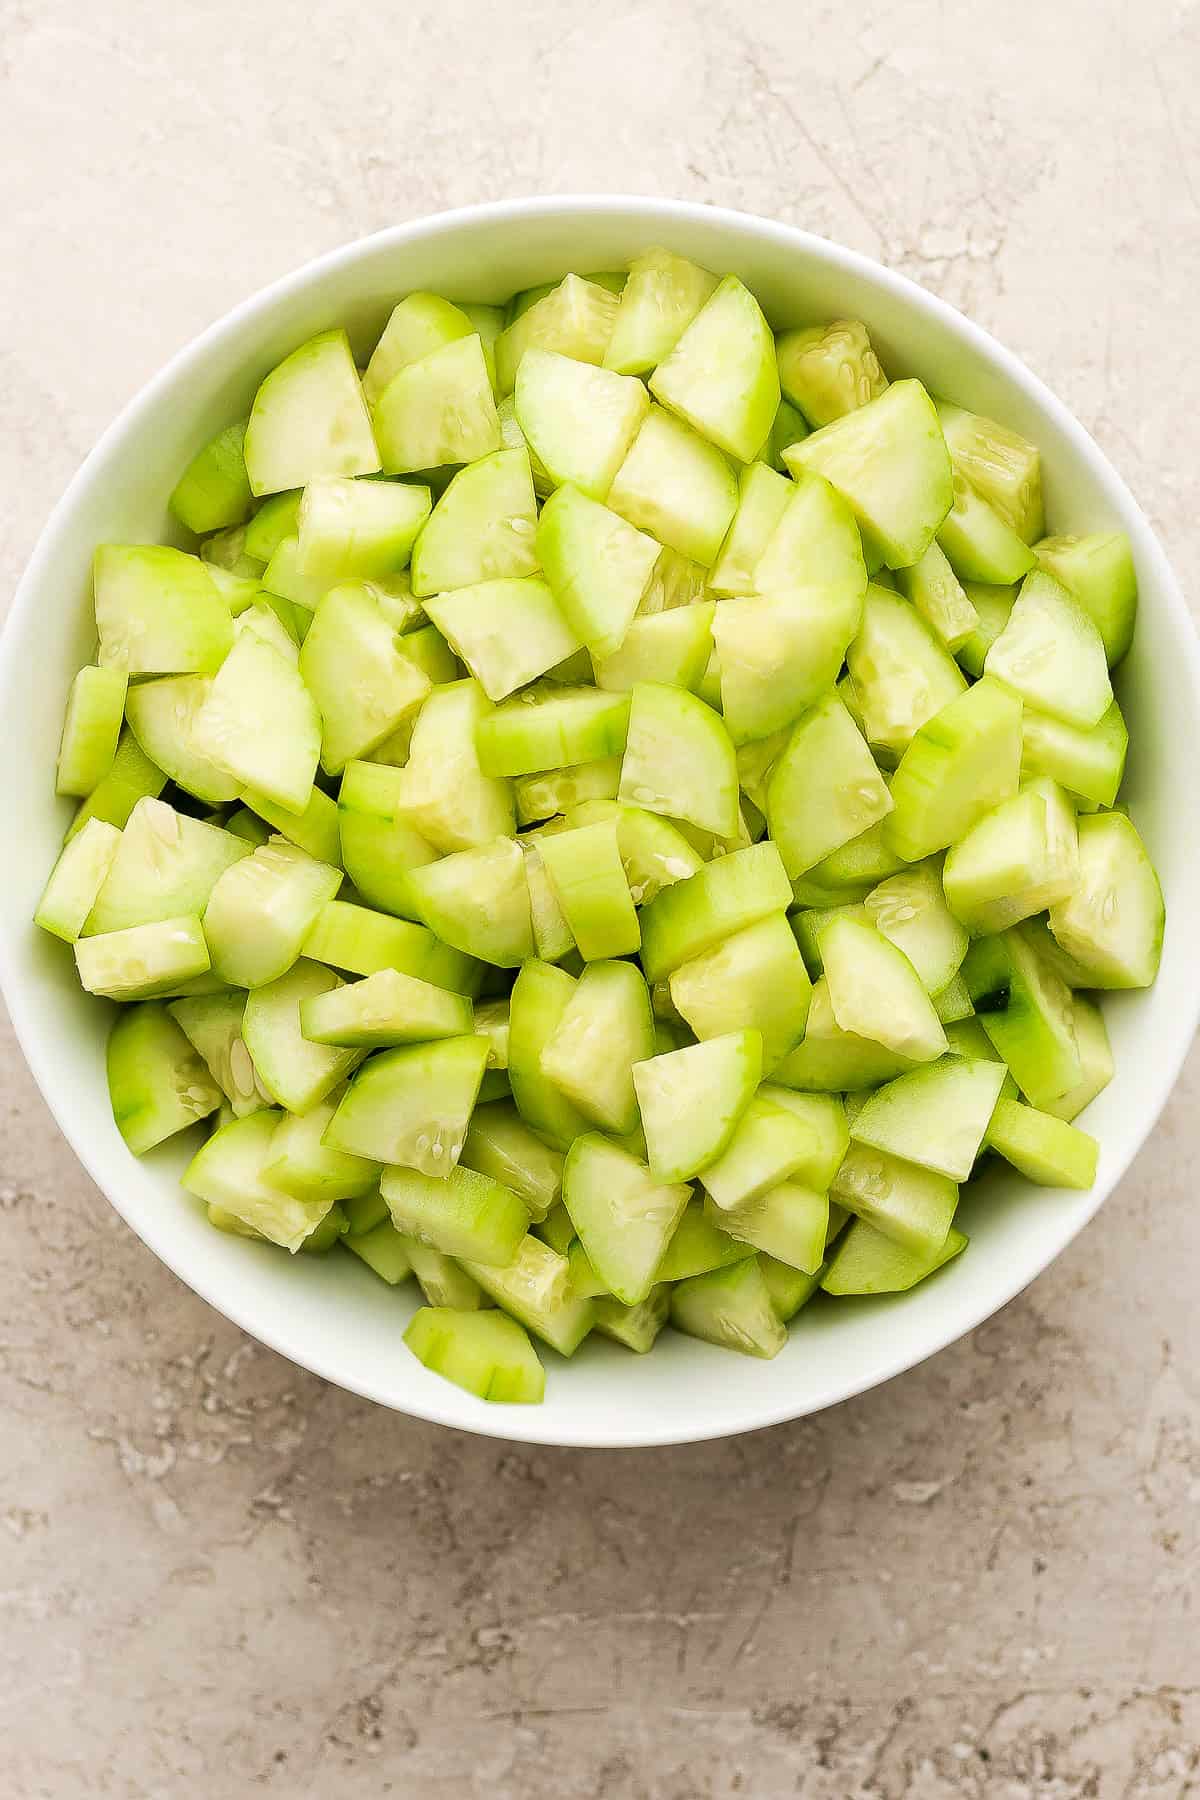 Peeled and chopped cucumbers in a large bowl.